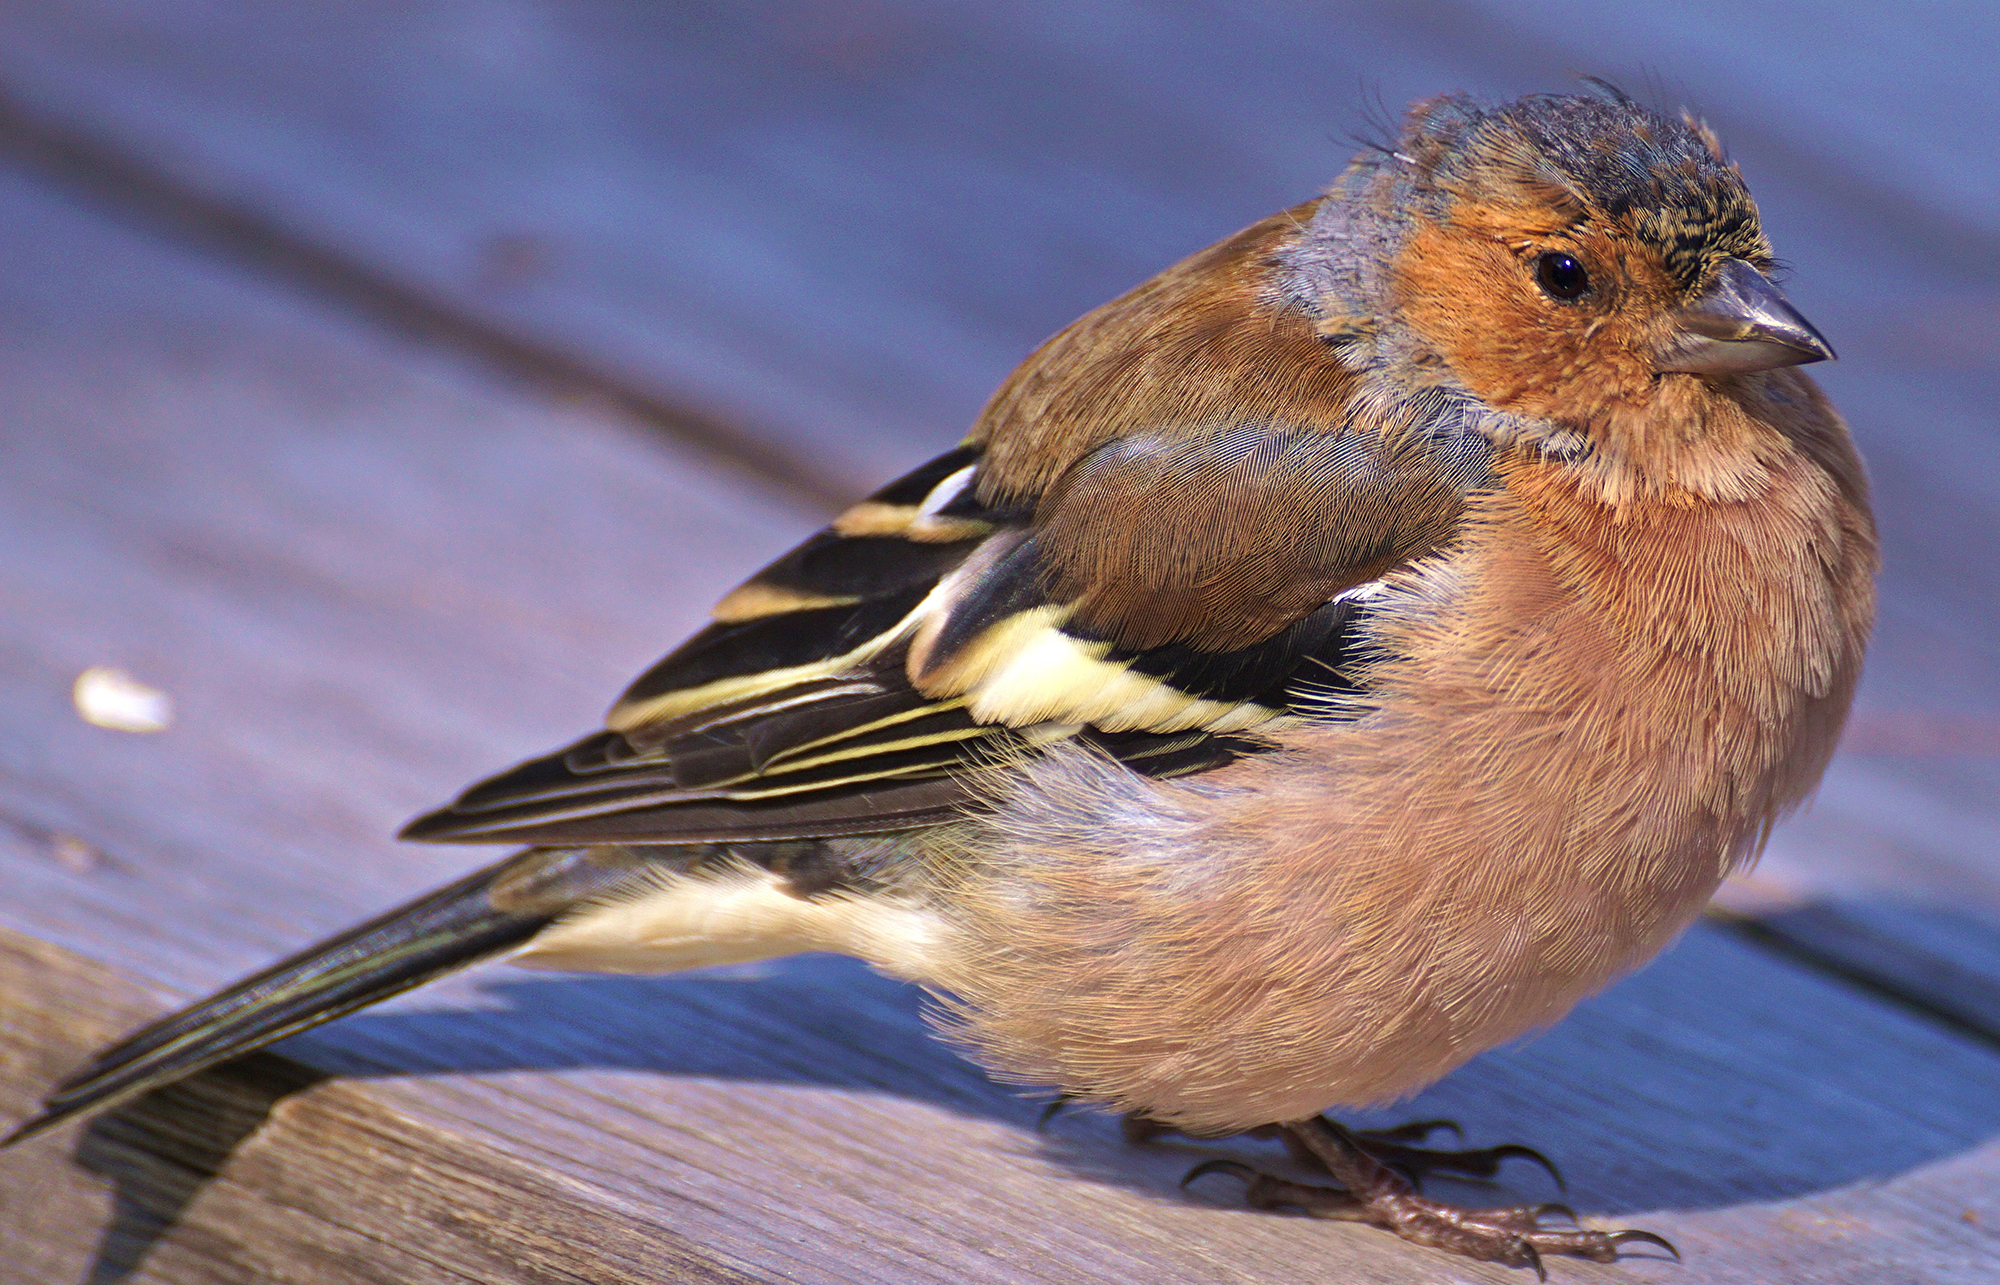 A chaffinch sitting on a wooden bench